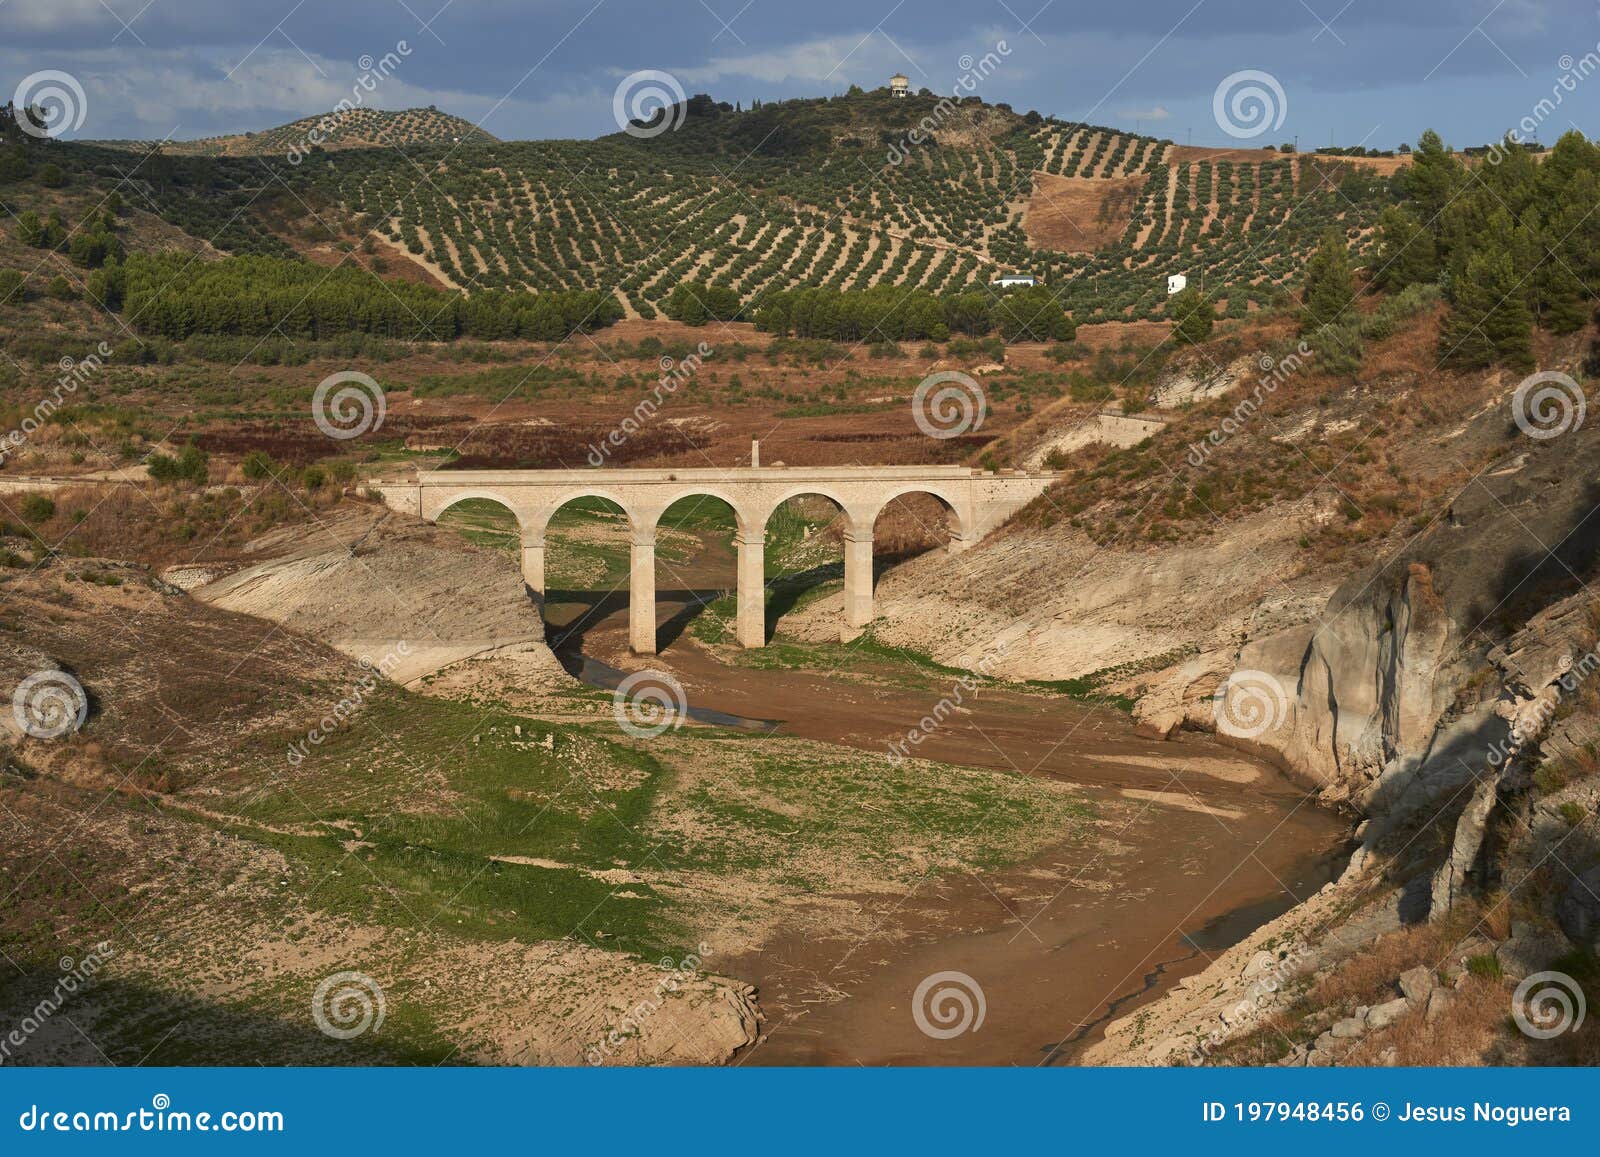 molinillo bridge in iznajar, cordoba province. during the rise of the reservoir, this bridge is submerged.  spain